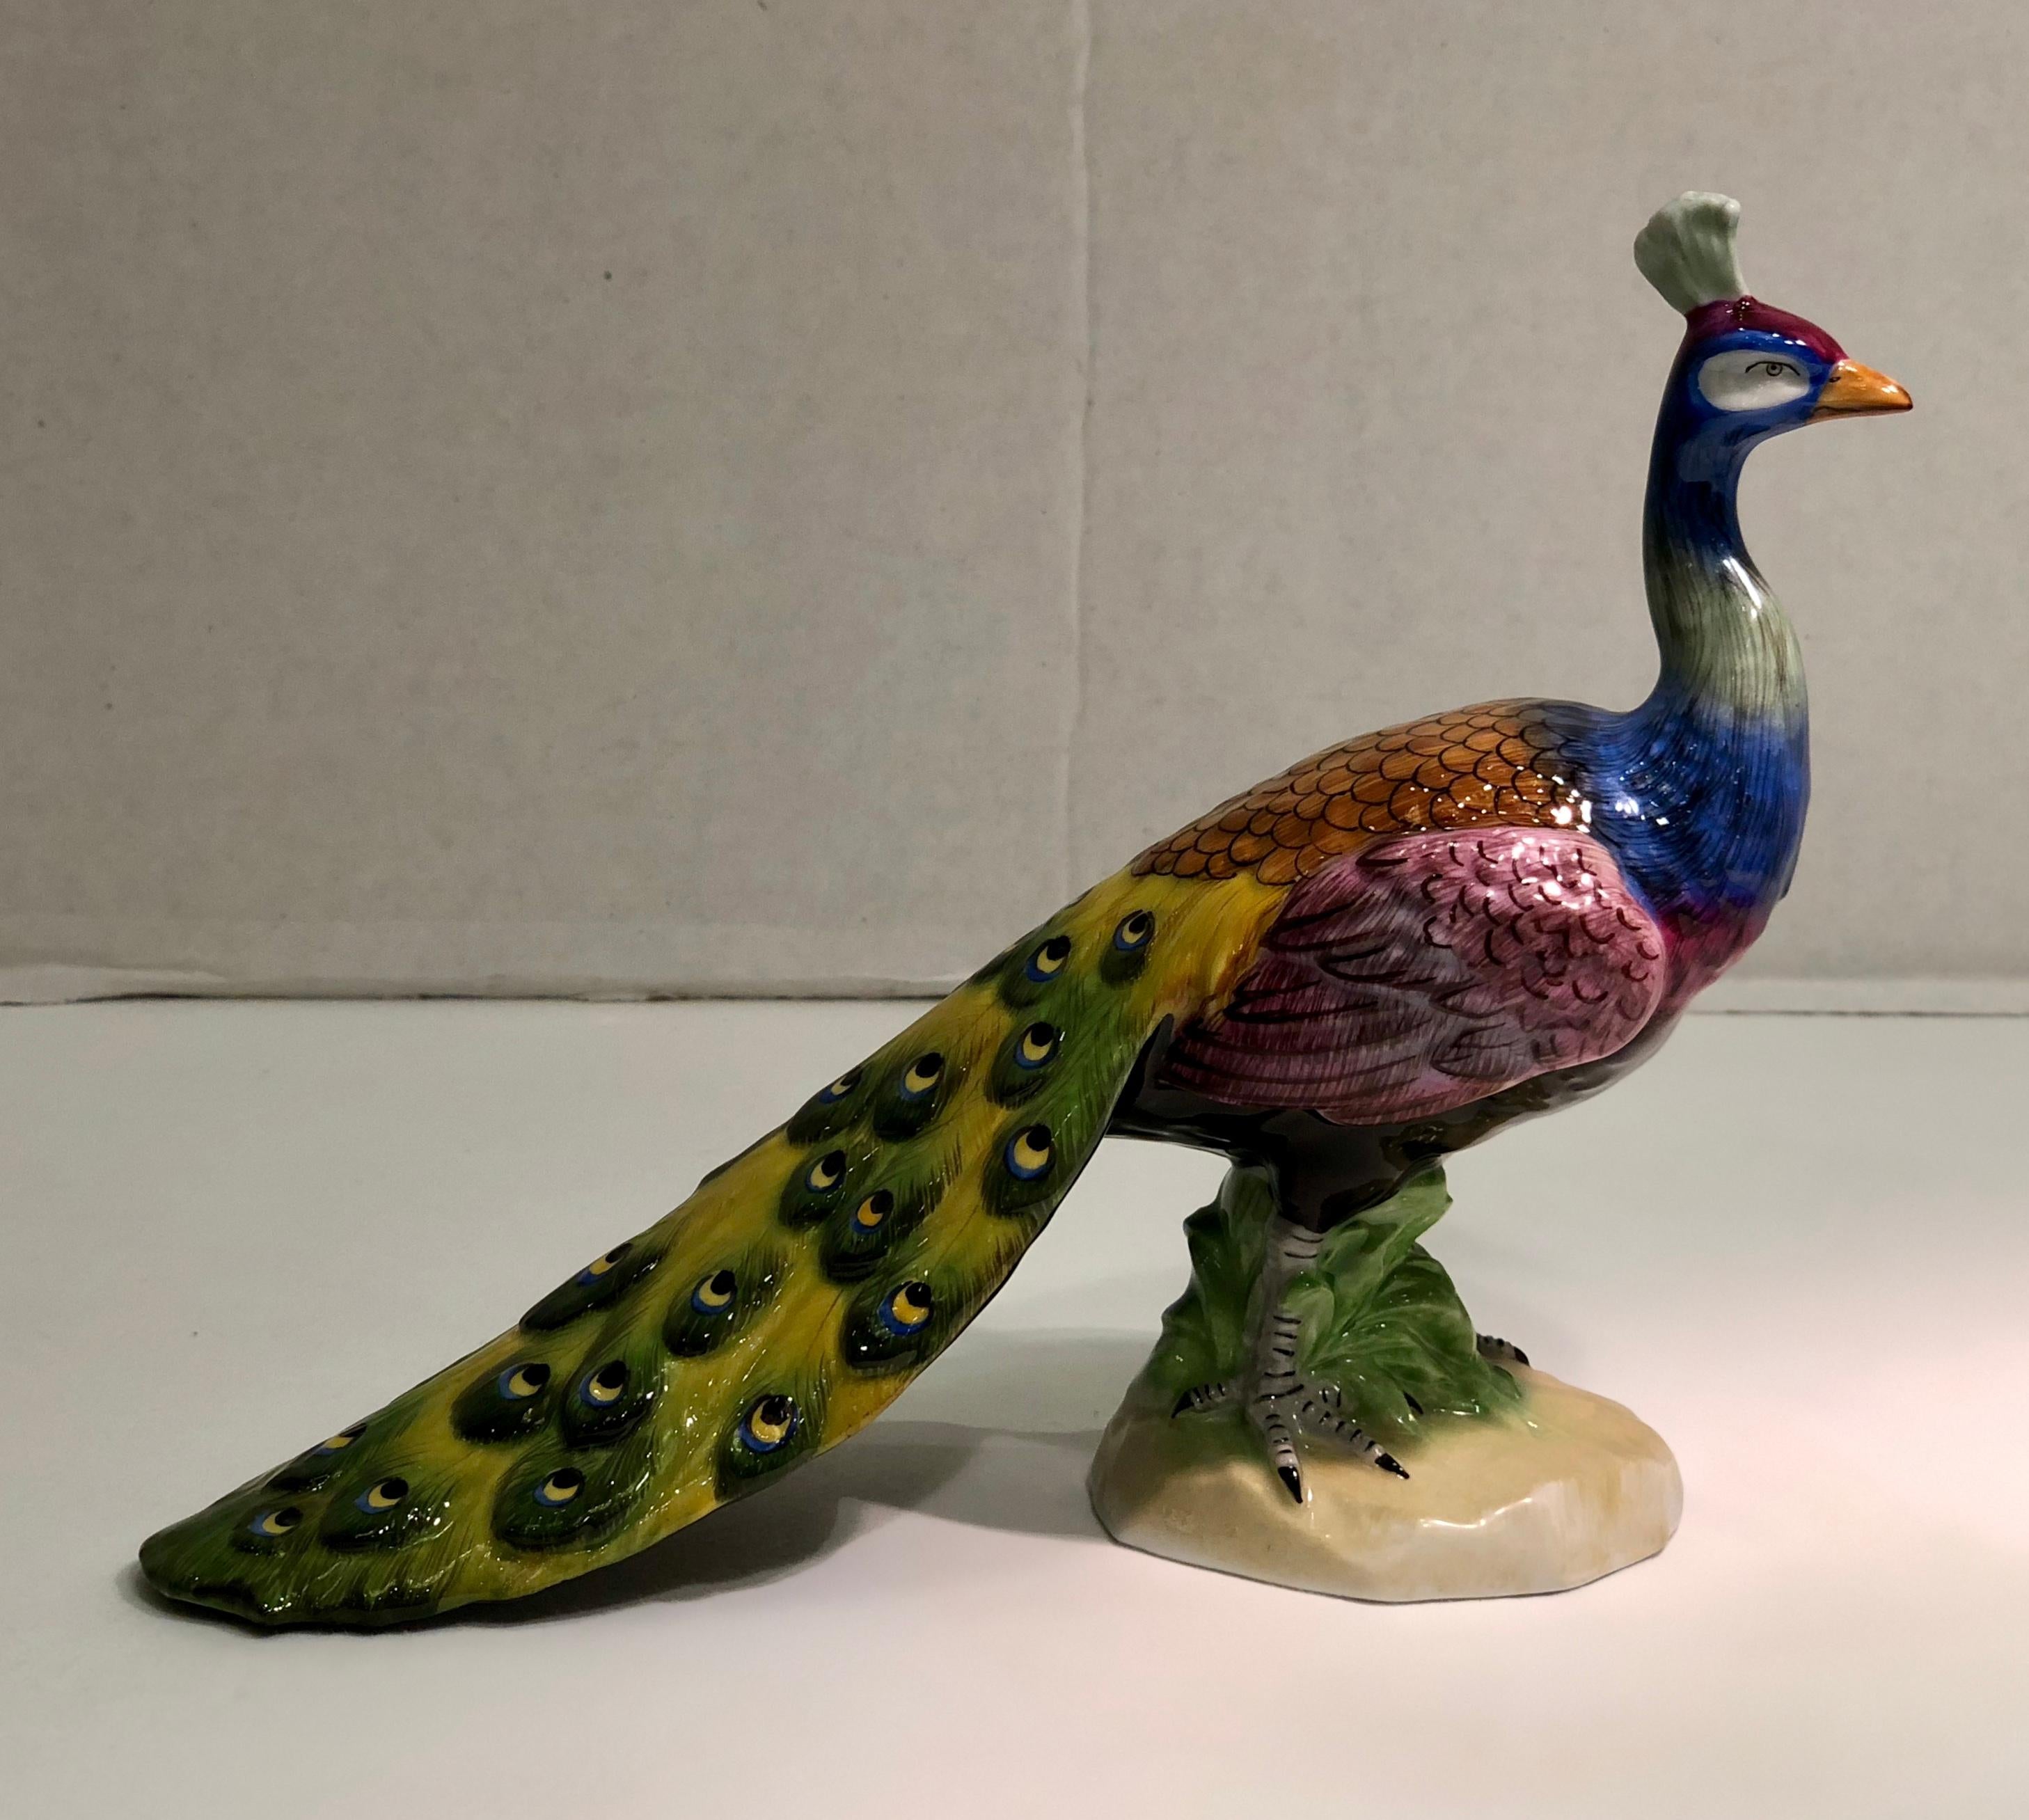 Exquise Dresden Porcelain Peacock Tail Closed Facing Forward Figurine Germany en vente 4